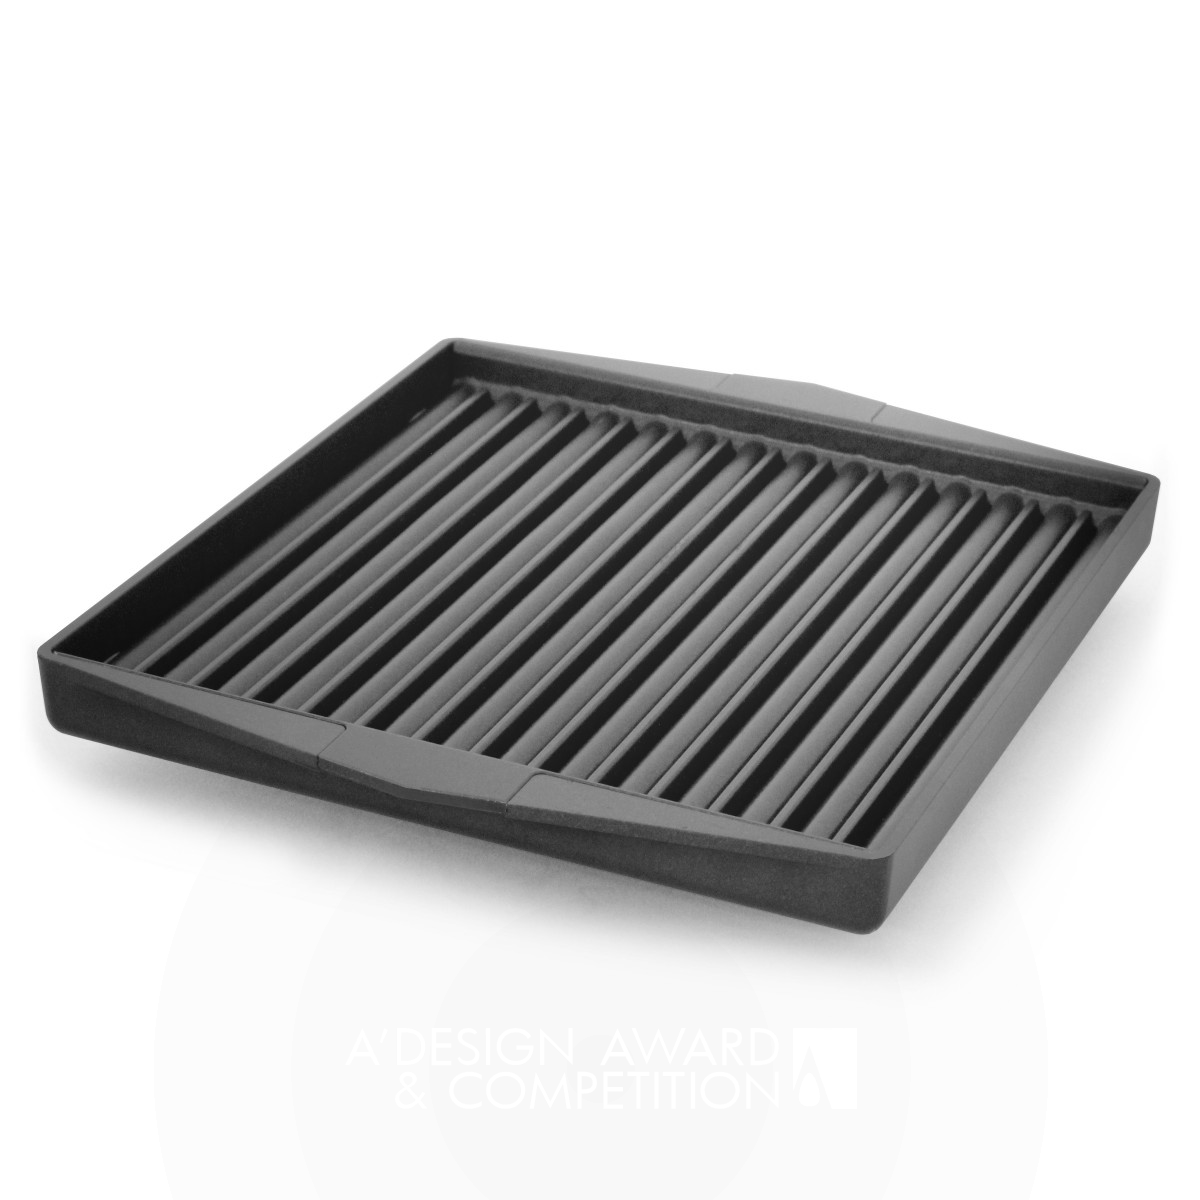 MiPan: Revolutionizing Grill Pan Cooking Surfaces